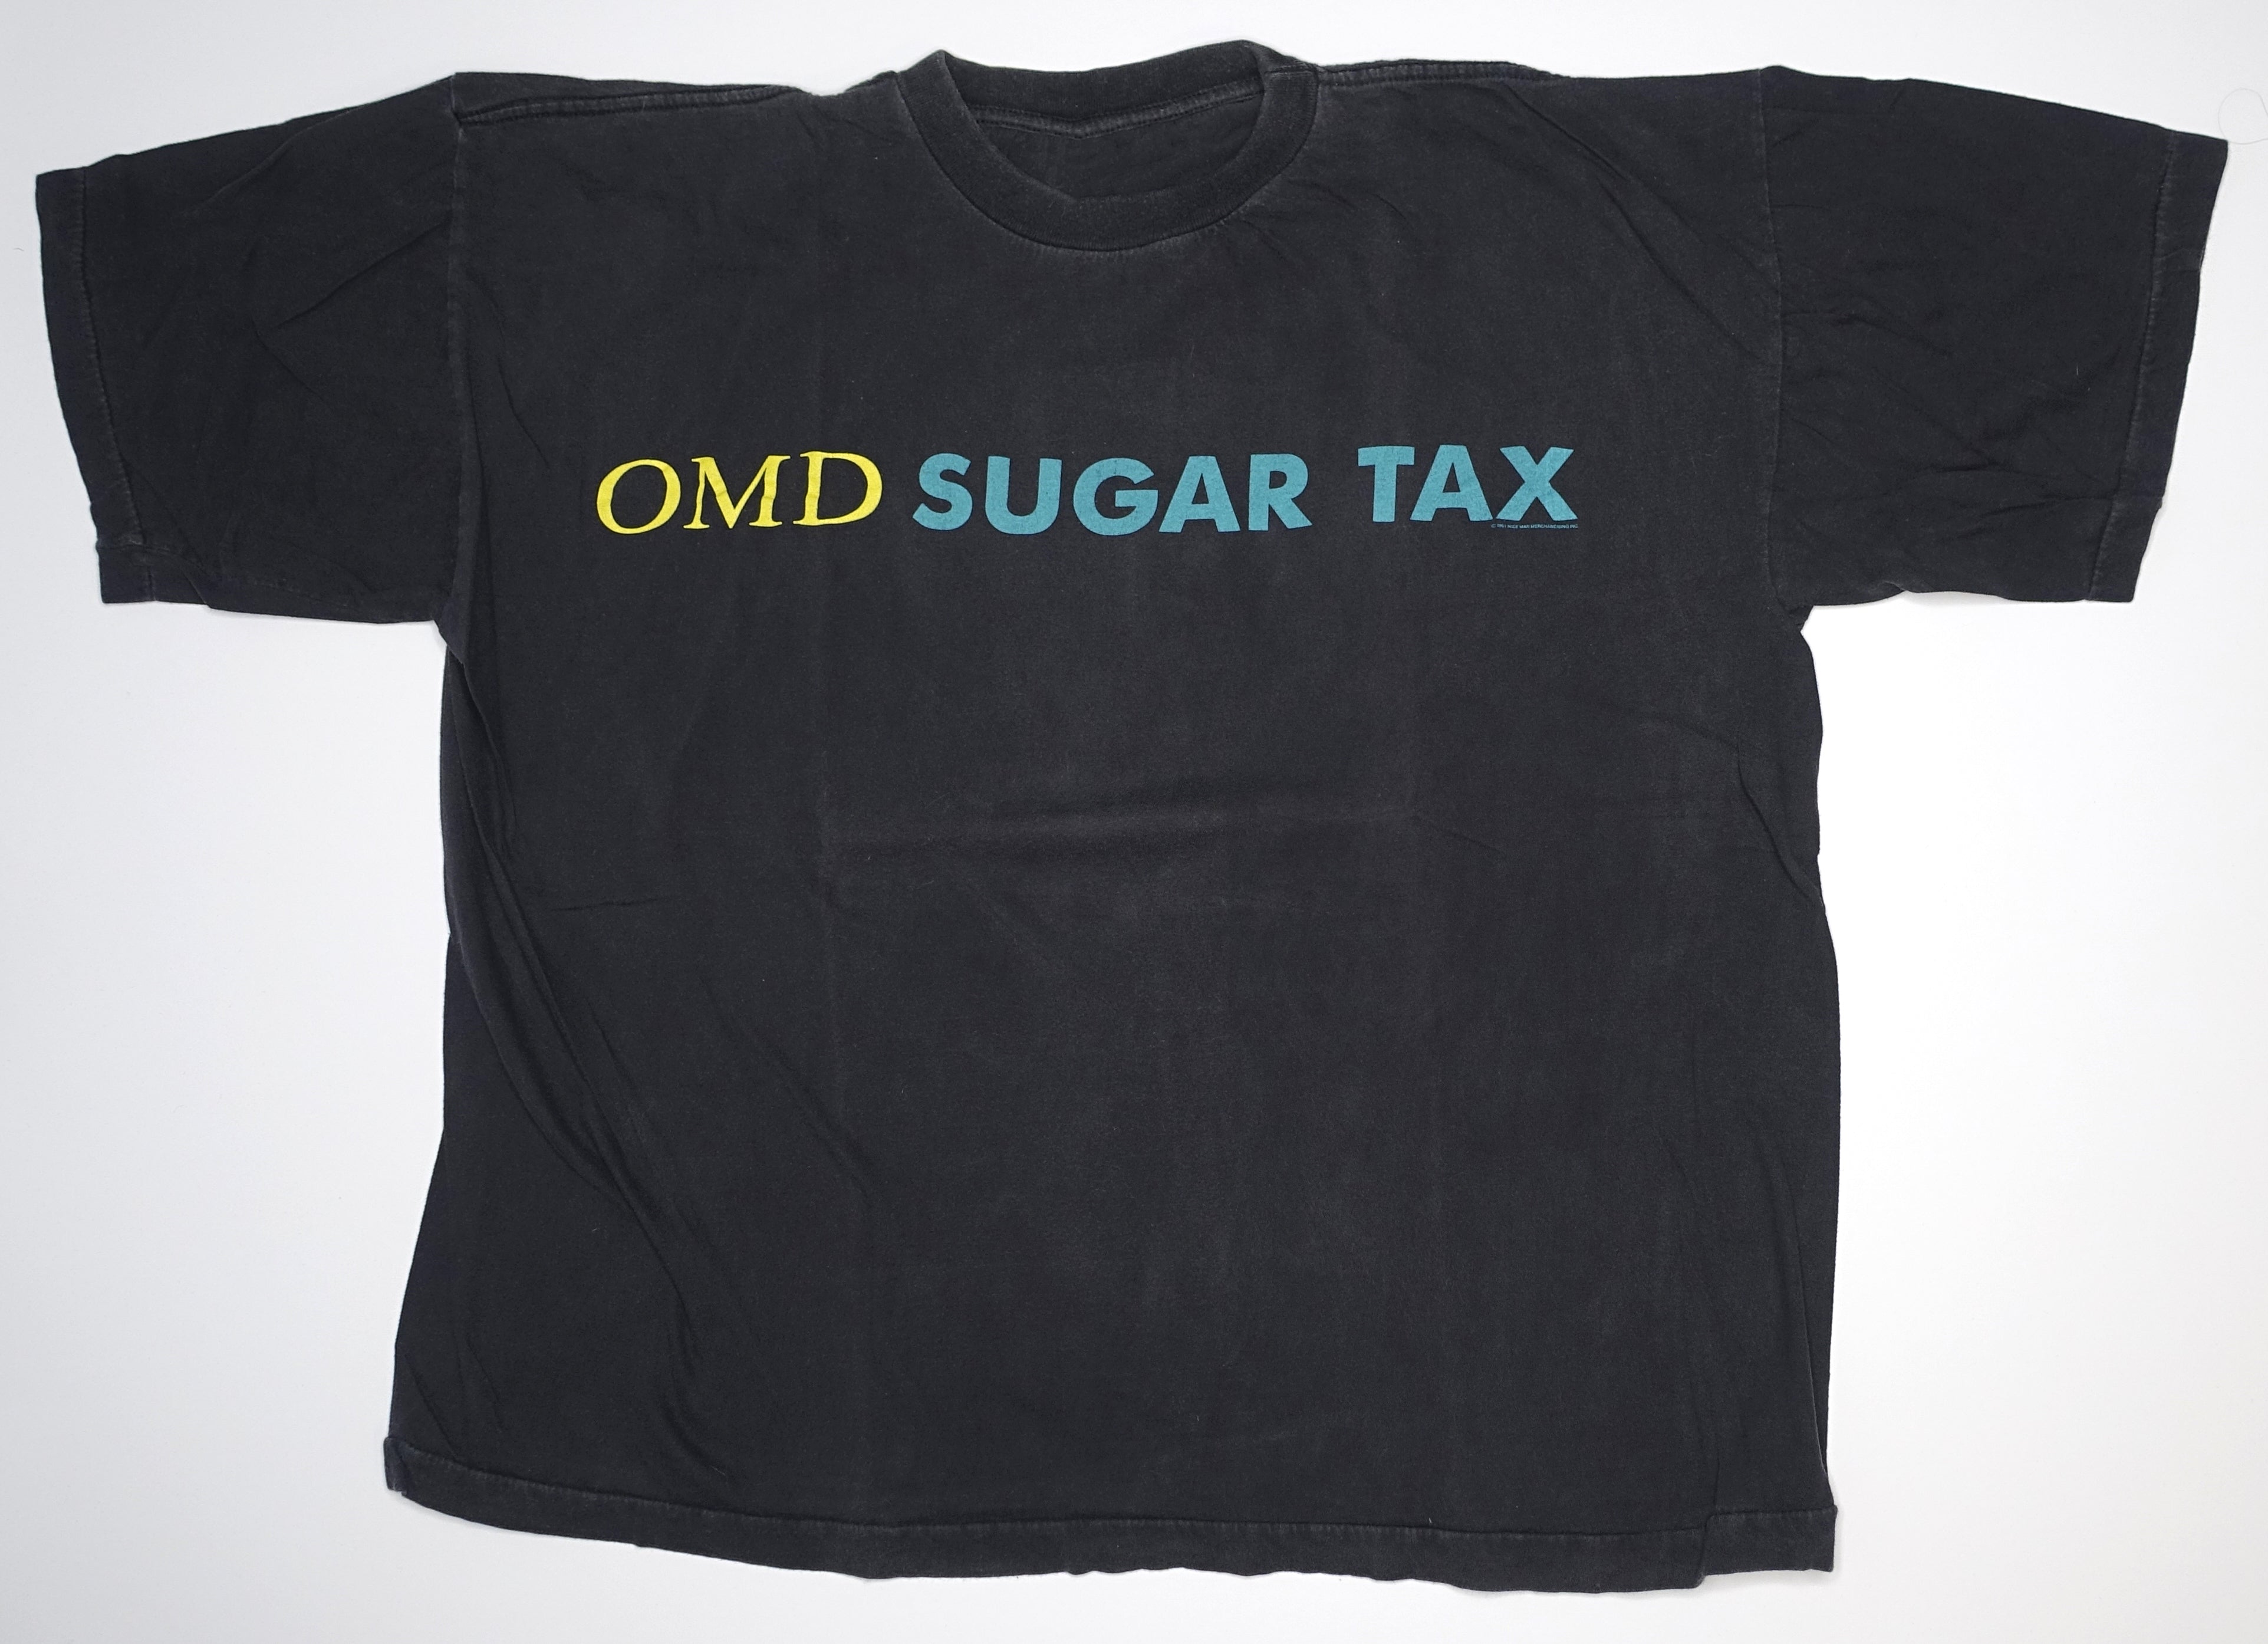 Orchestral Manoeuvres In The Dark (OMD) - Sugar Tax 1991 UK Tour Shirt Size XL